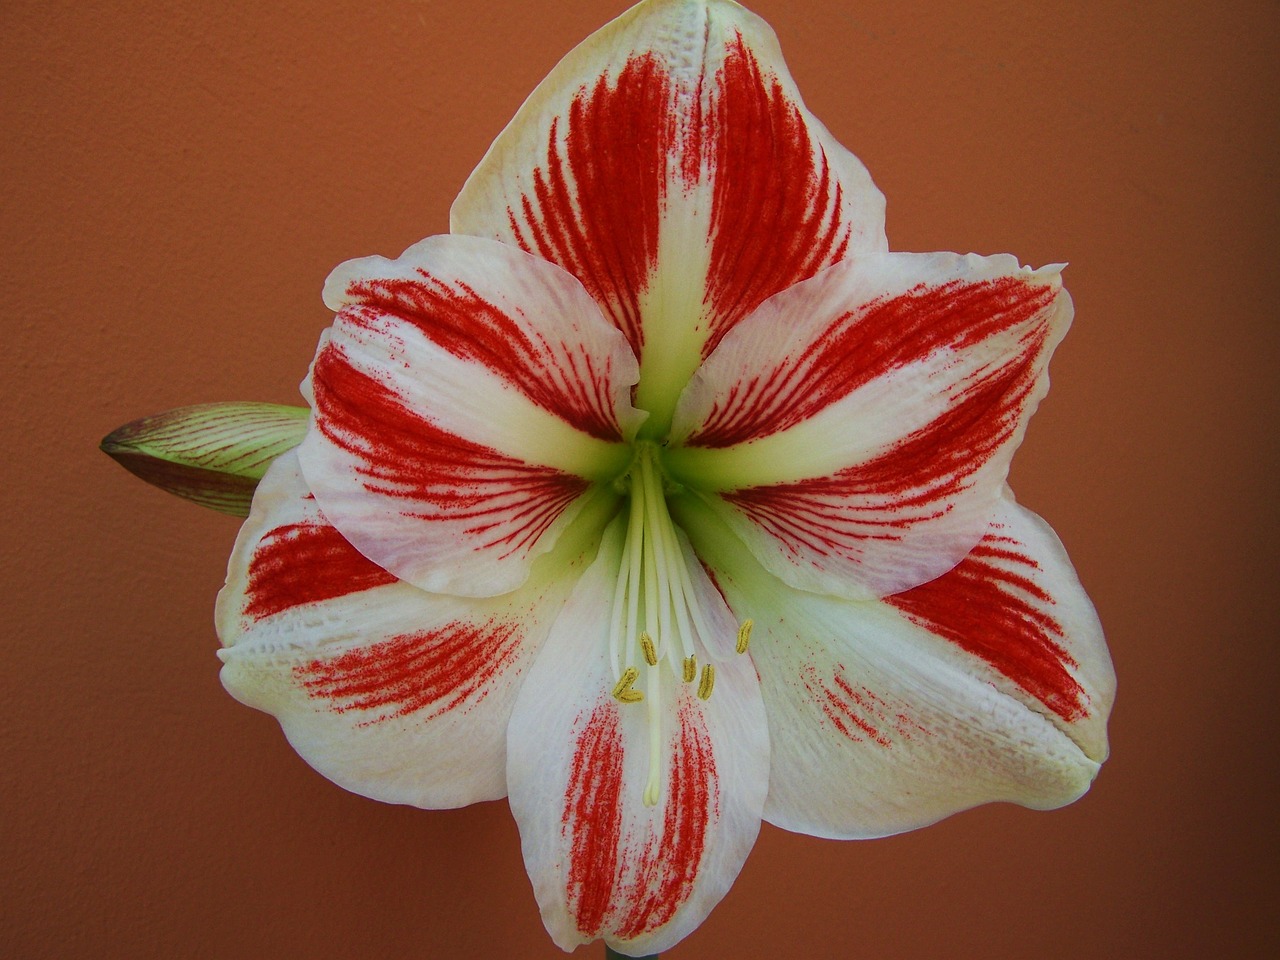 amaryllis red-and-white flowers bulbous plant free photo